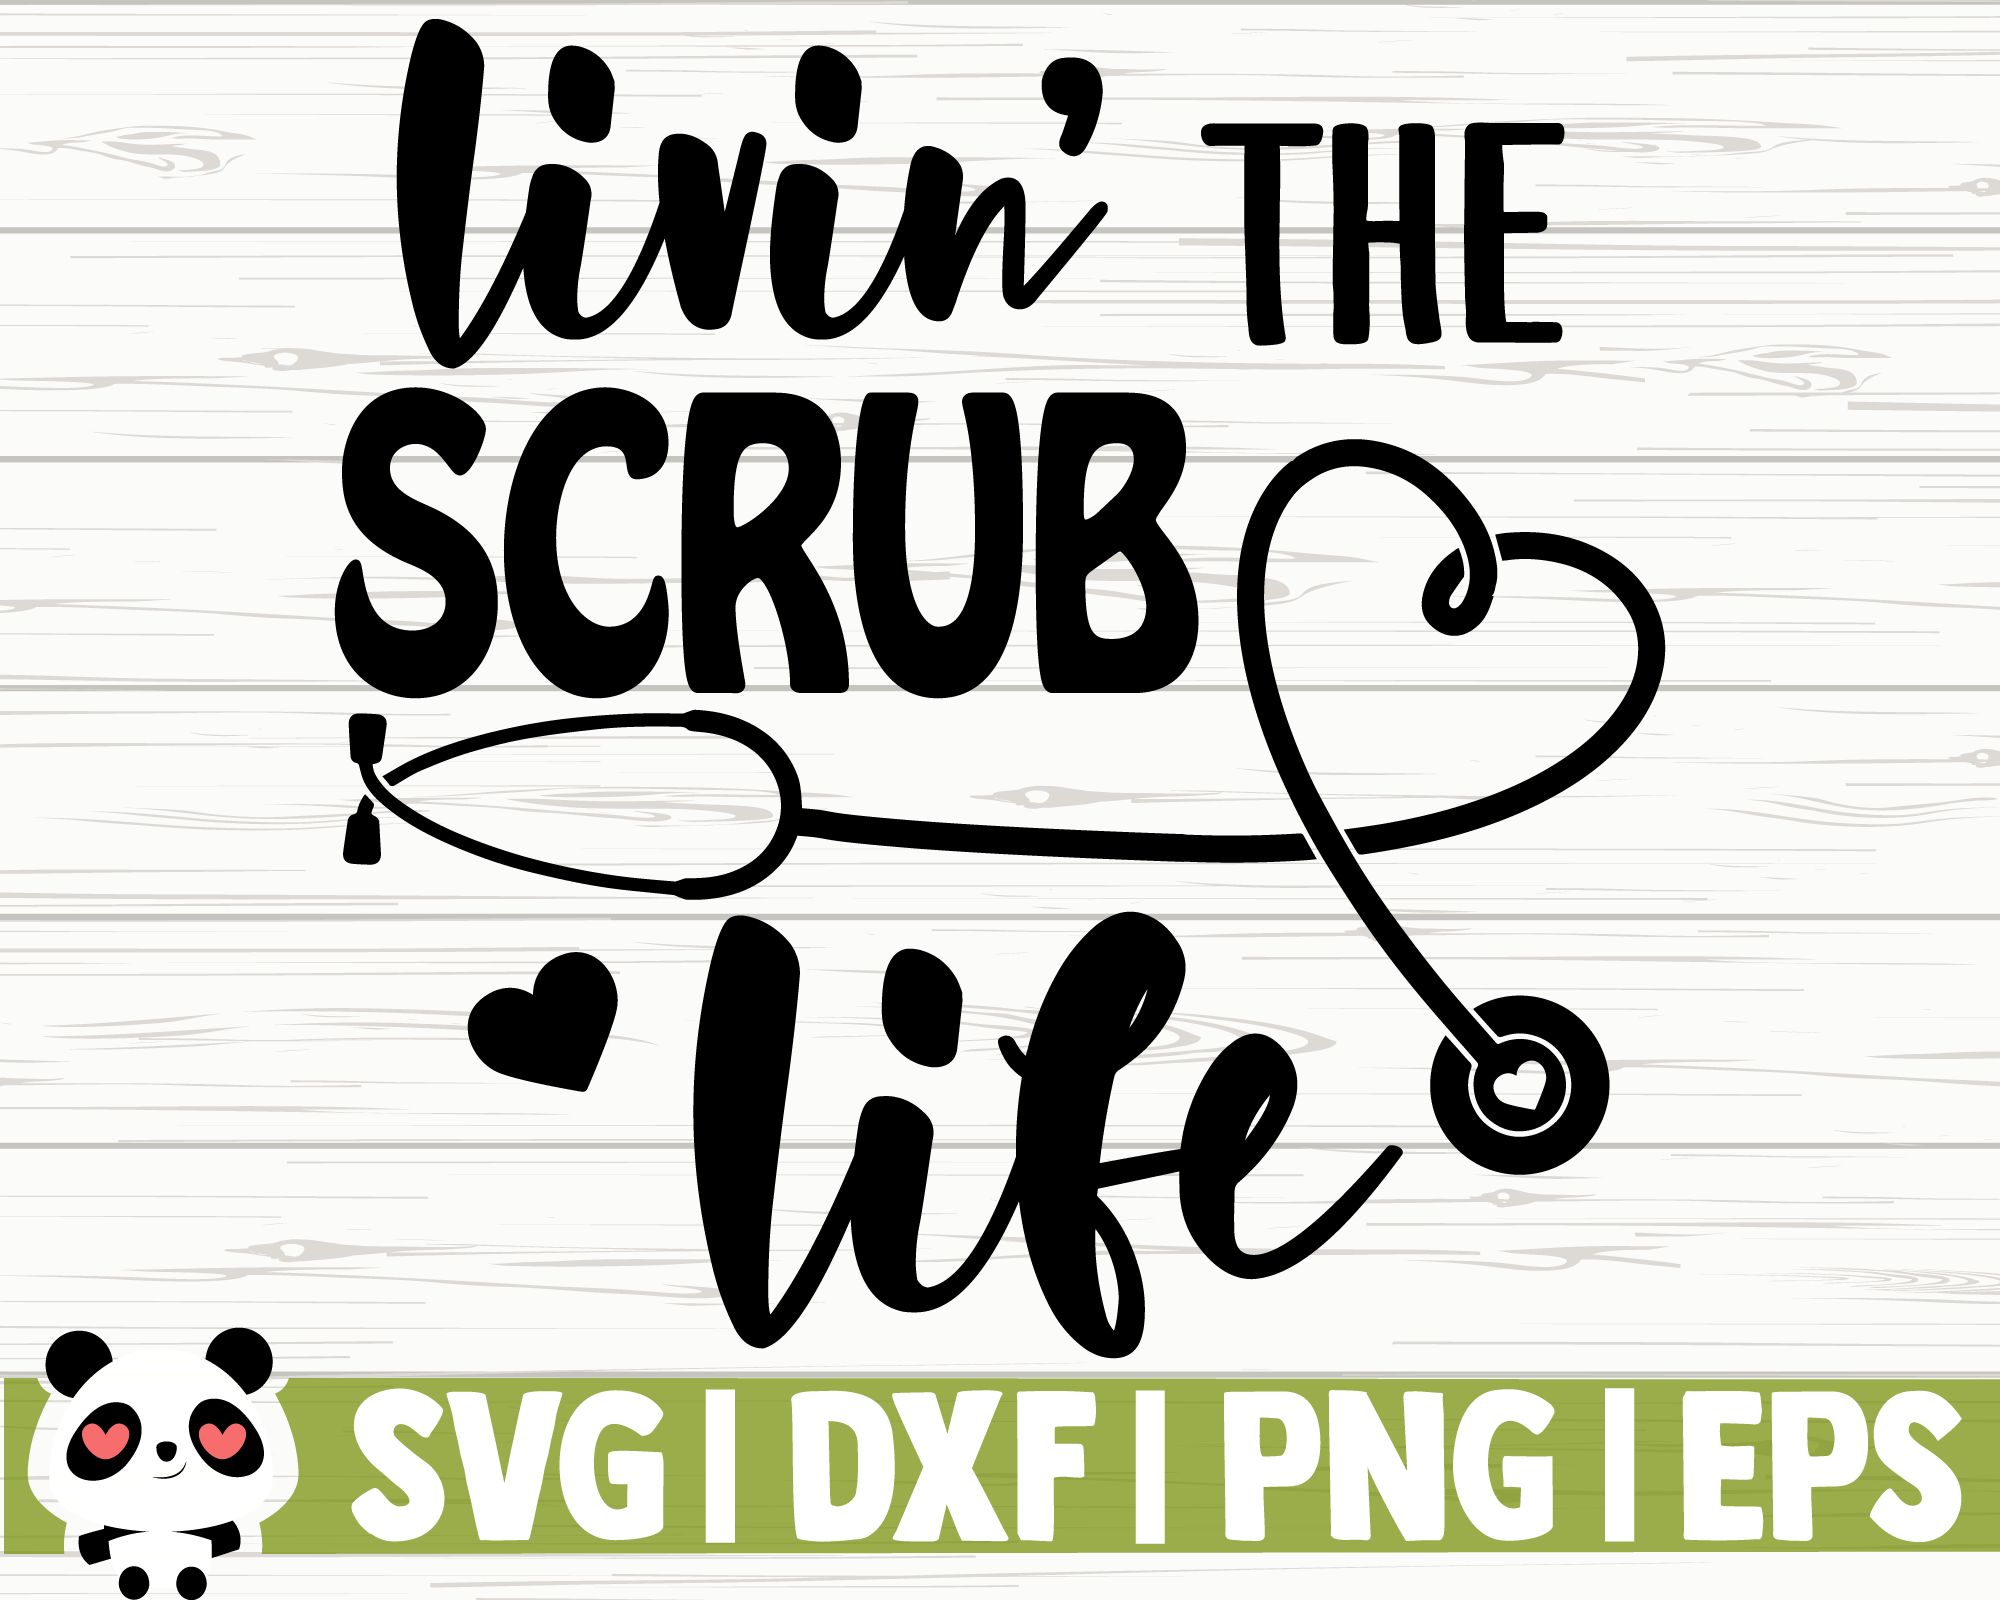 Livin The Scrub Life Nurse  Doctor  Medic Embroidered Sew or Iron on Patch A